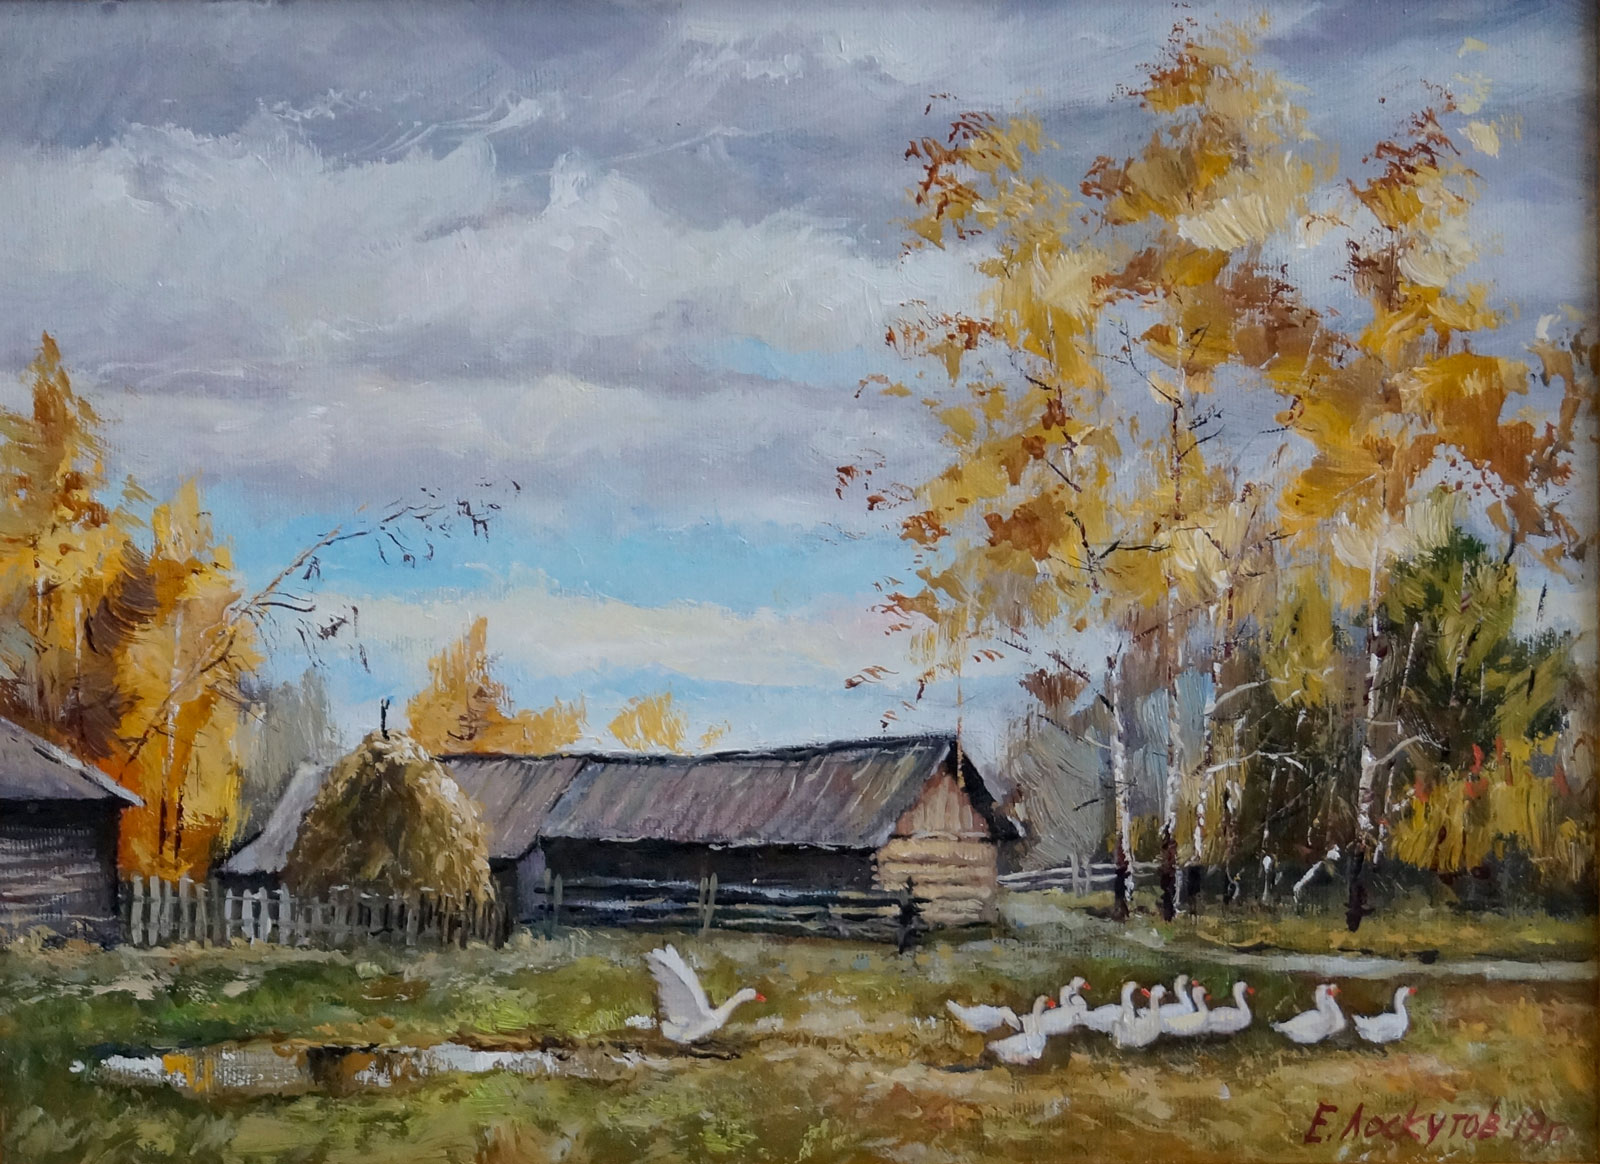 Landscape with Geese - 1, Evgeny Loskutov, Buy the painting Oil